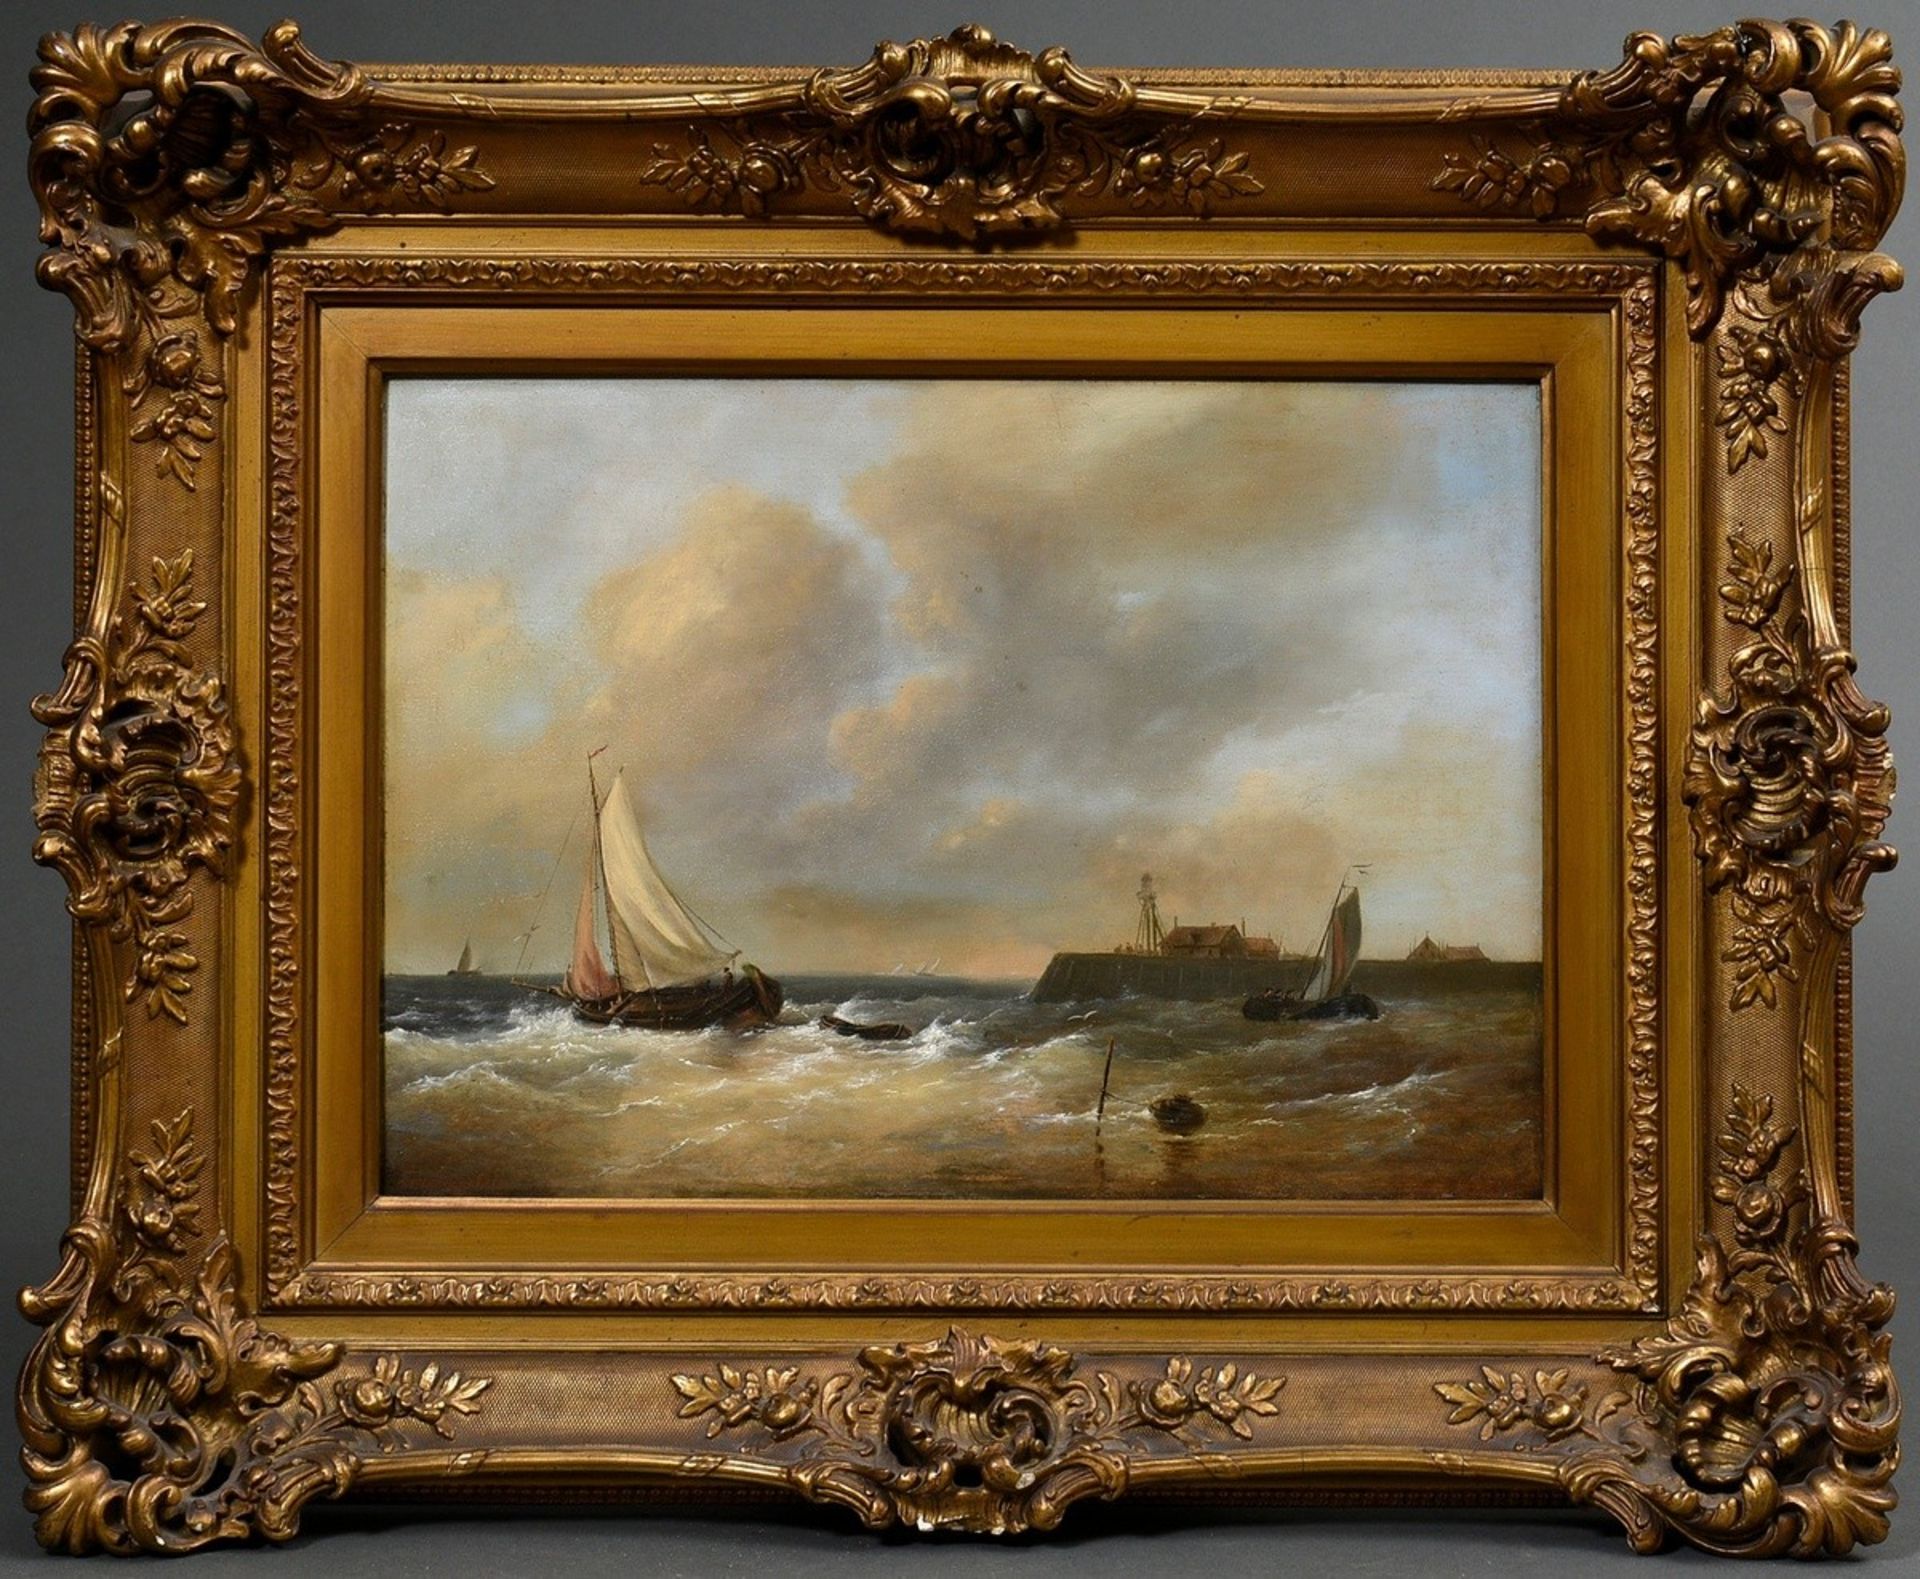 Hulk, Abraham I (1813-1897) "Two sailors in front of stormy coast" 1866, oil/wood, lower left signe - Image 2 of 8